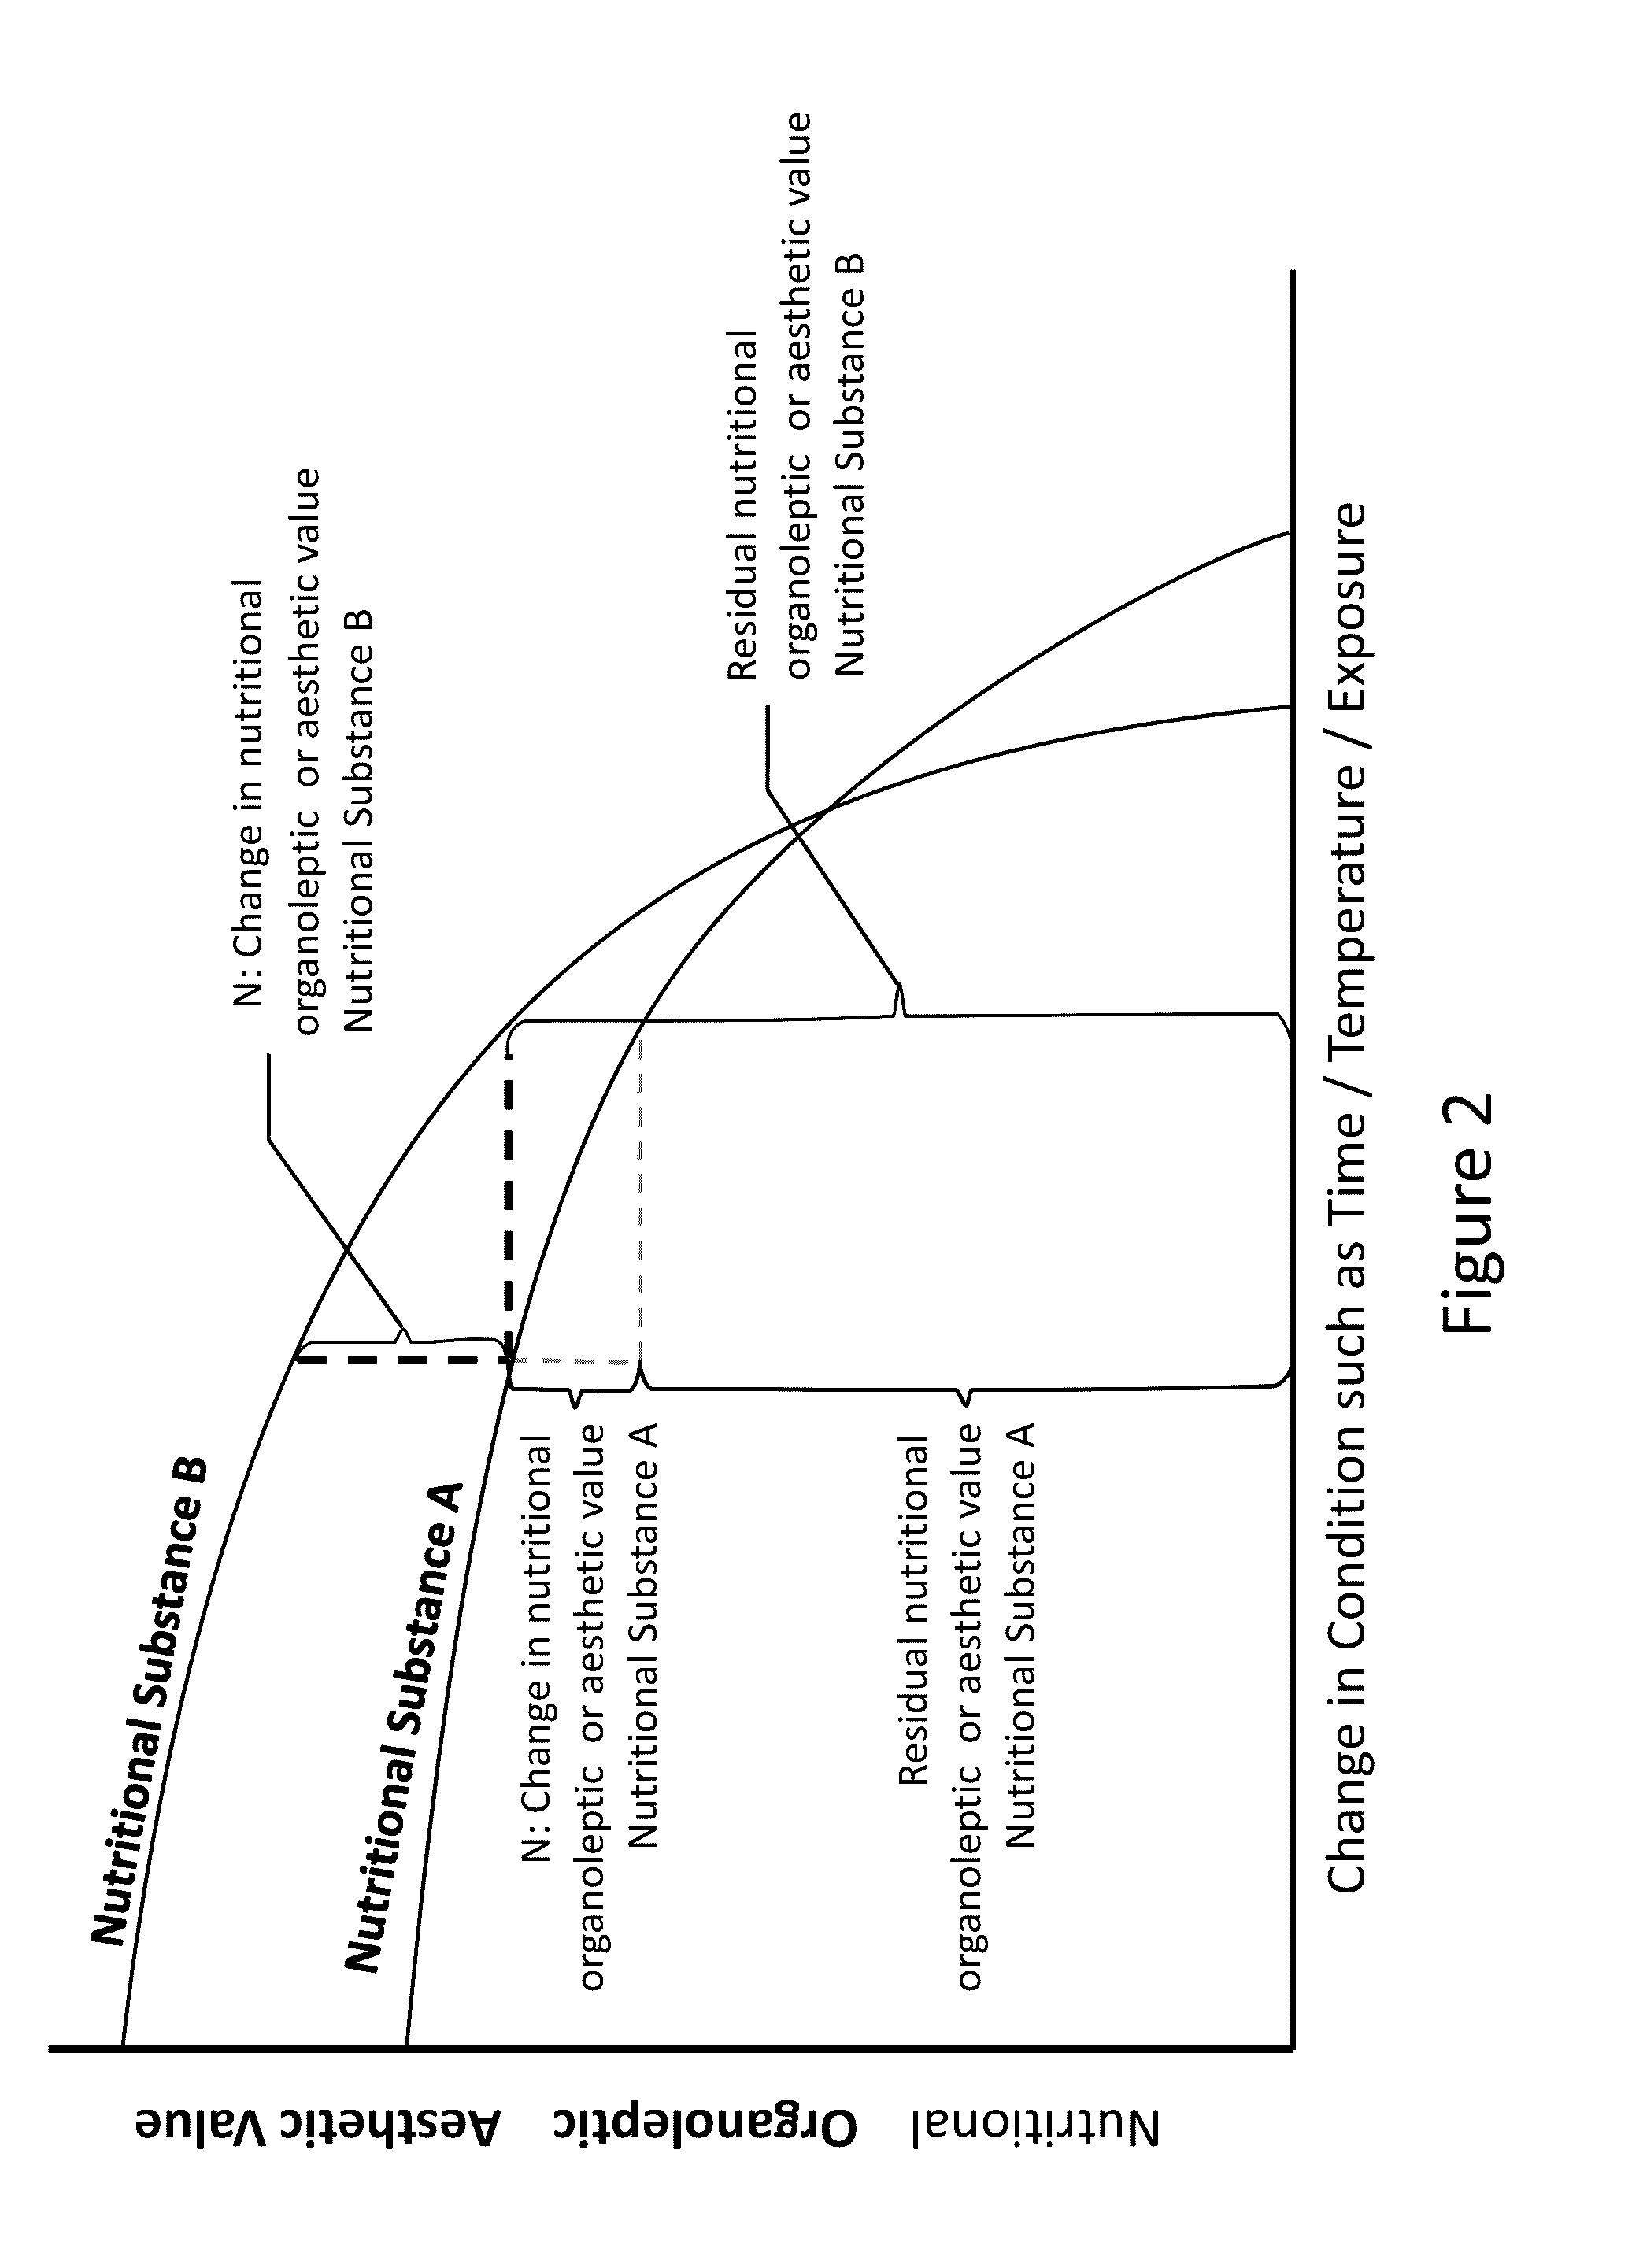 Nutrition Based Food System and Method